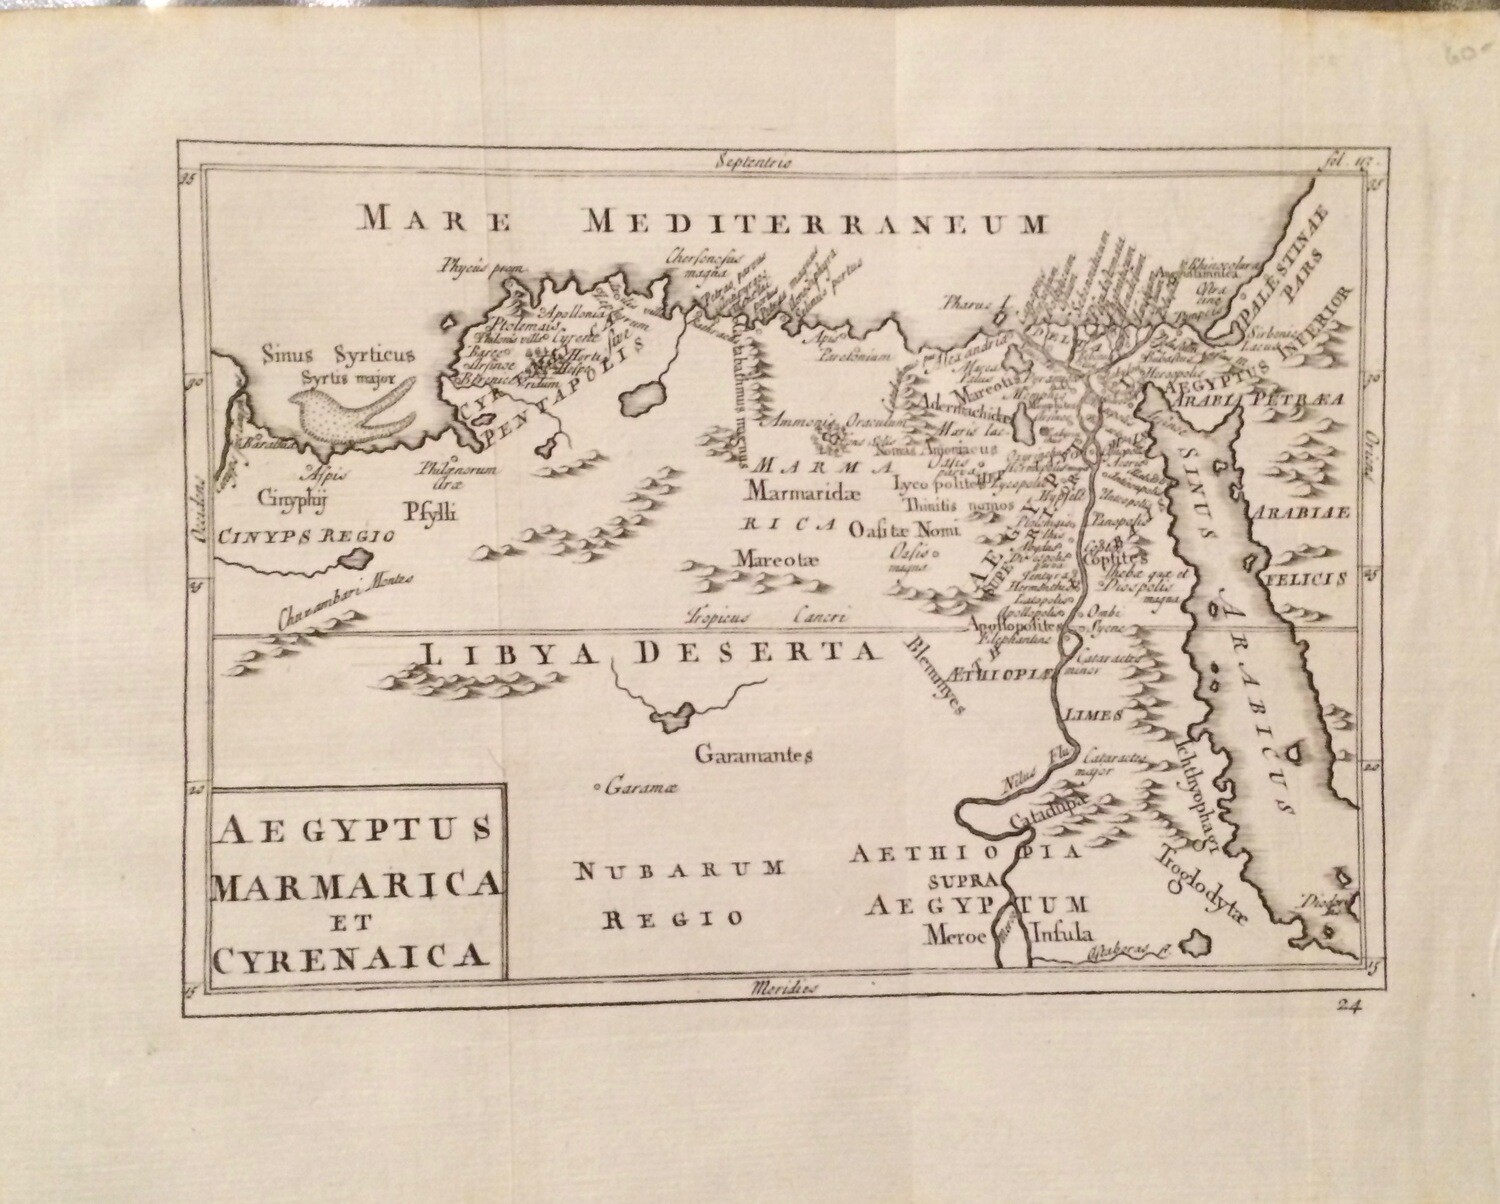 1731 Map of Ancient Egypt Marmarica Cyrenaica and Aegyptus by Christopher Cellarius